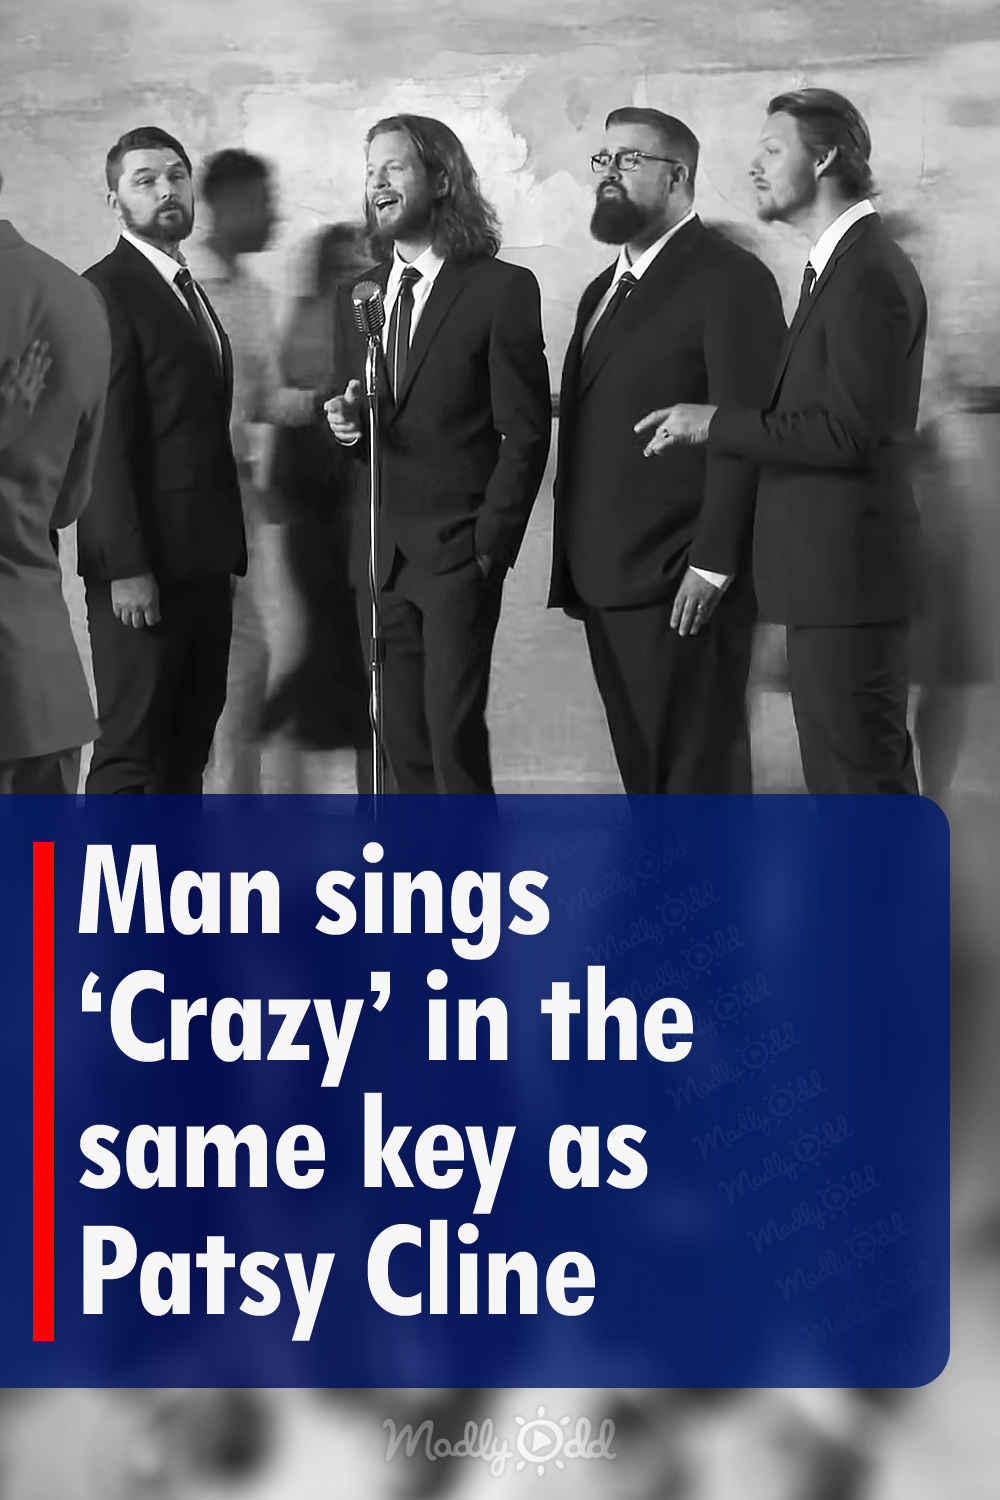 Man sings \'Crazy\' in the same key as Patsy Cline